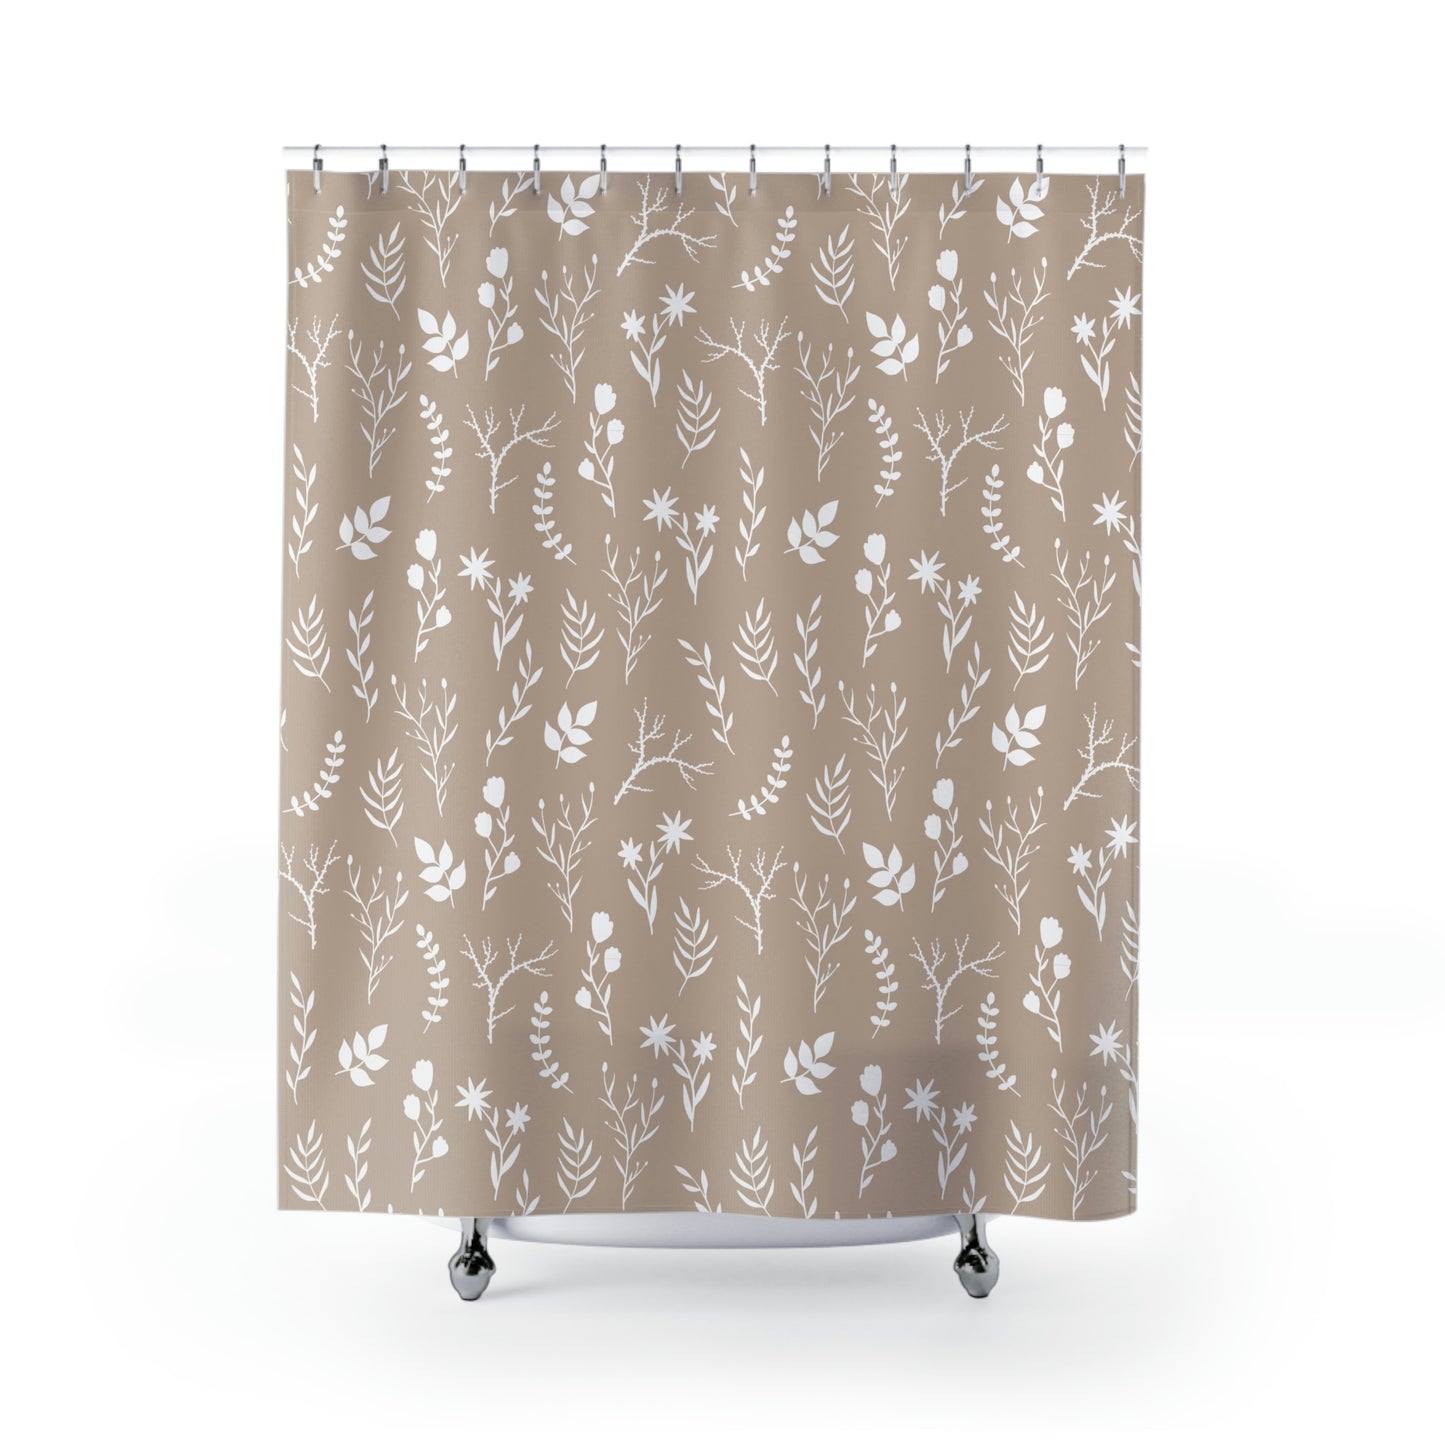 White and Taupe Floral Print Shower Curtain | Modern Floral Shower Curtain